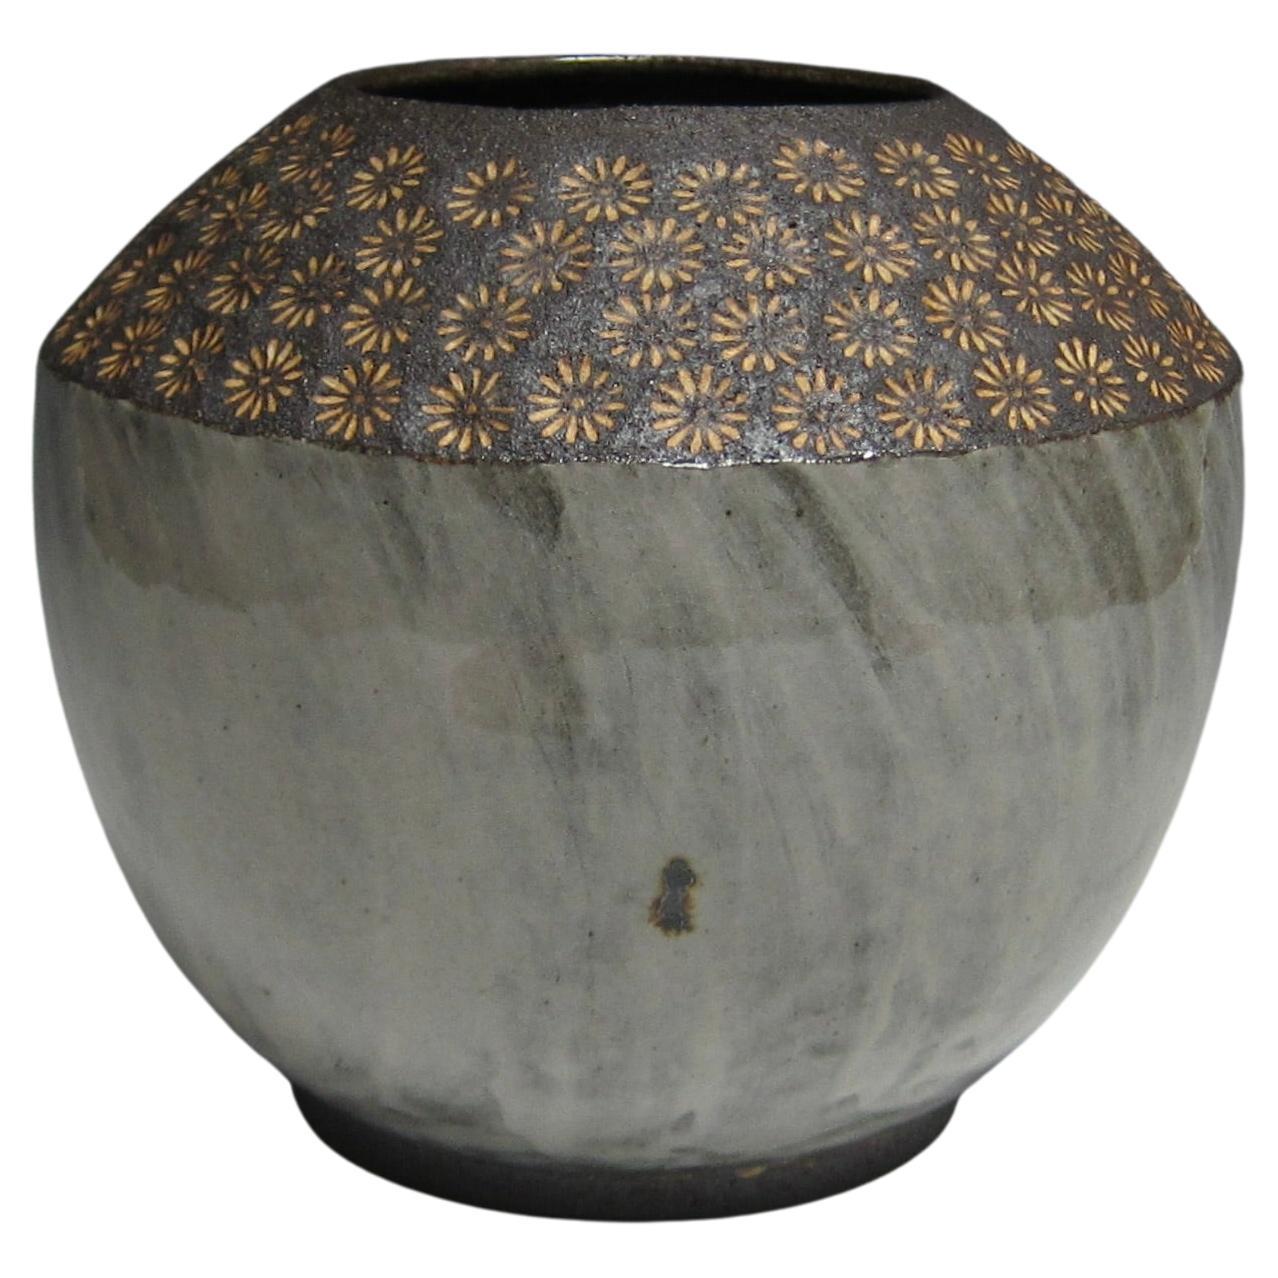 Wheel Thrown Flower Stamped Buncheong Vase by Jason Fox For Sale